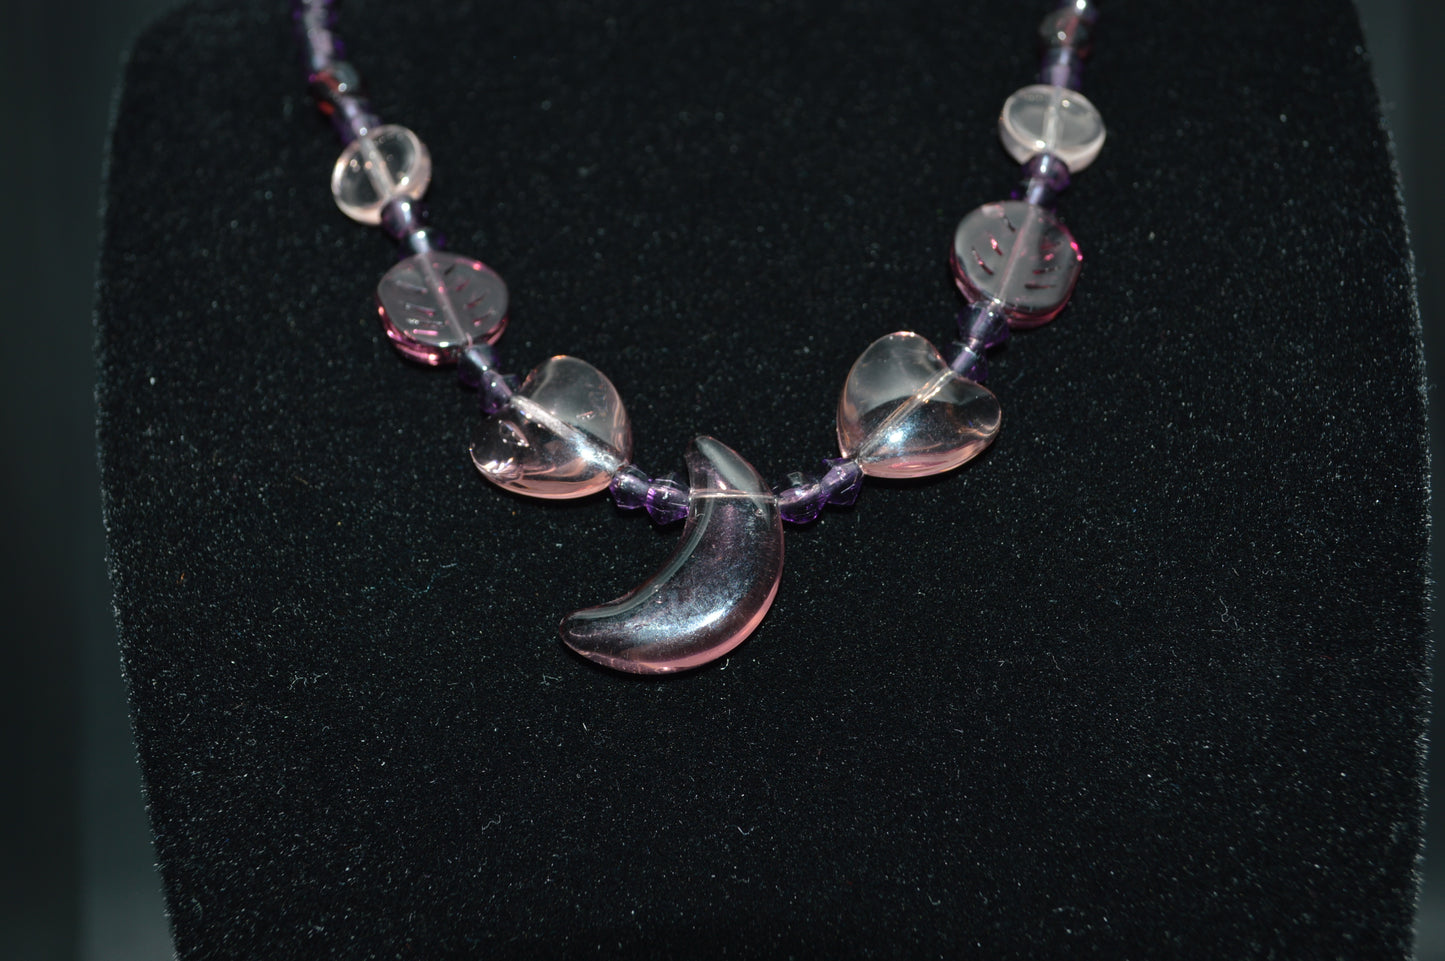 Purple Glass Necklace With Moon